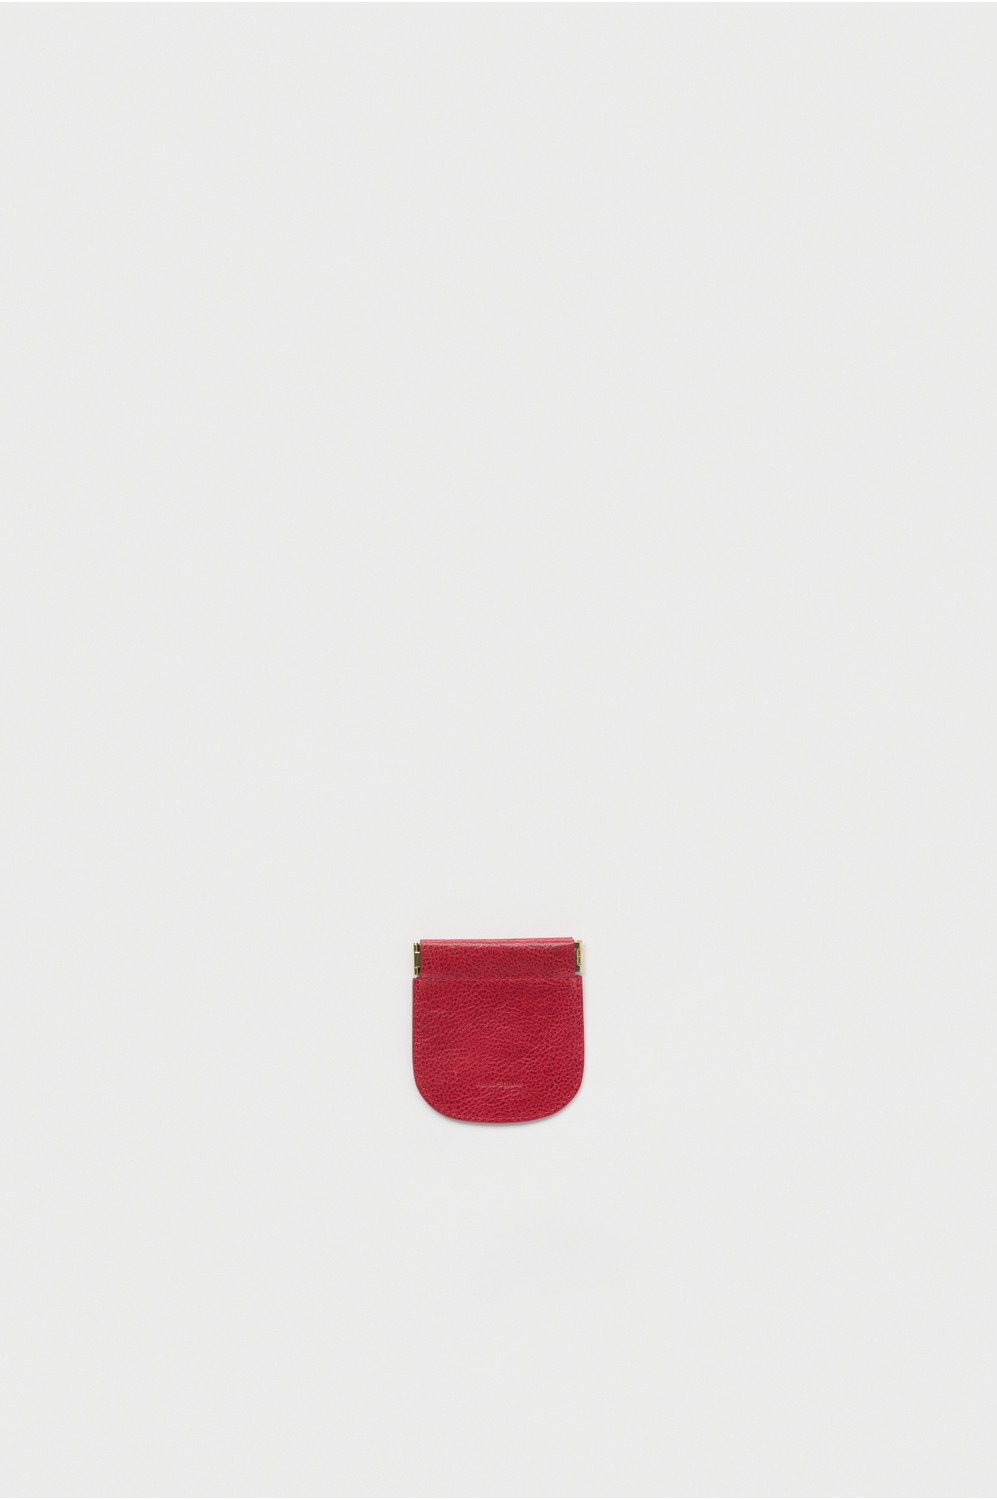 coin purse S 詳細画像 red 1